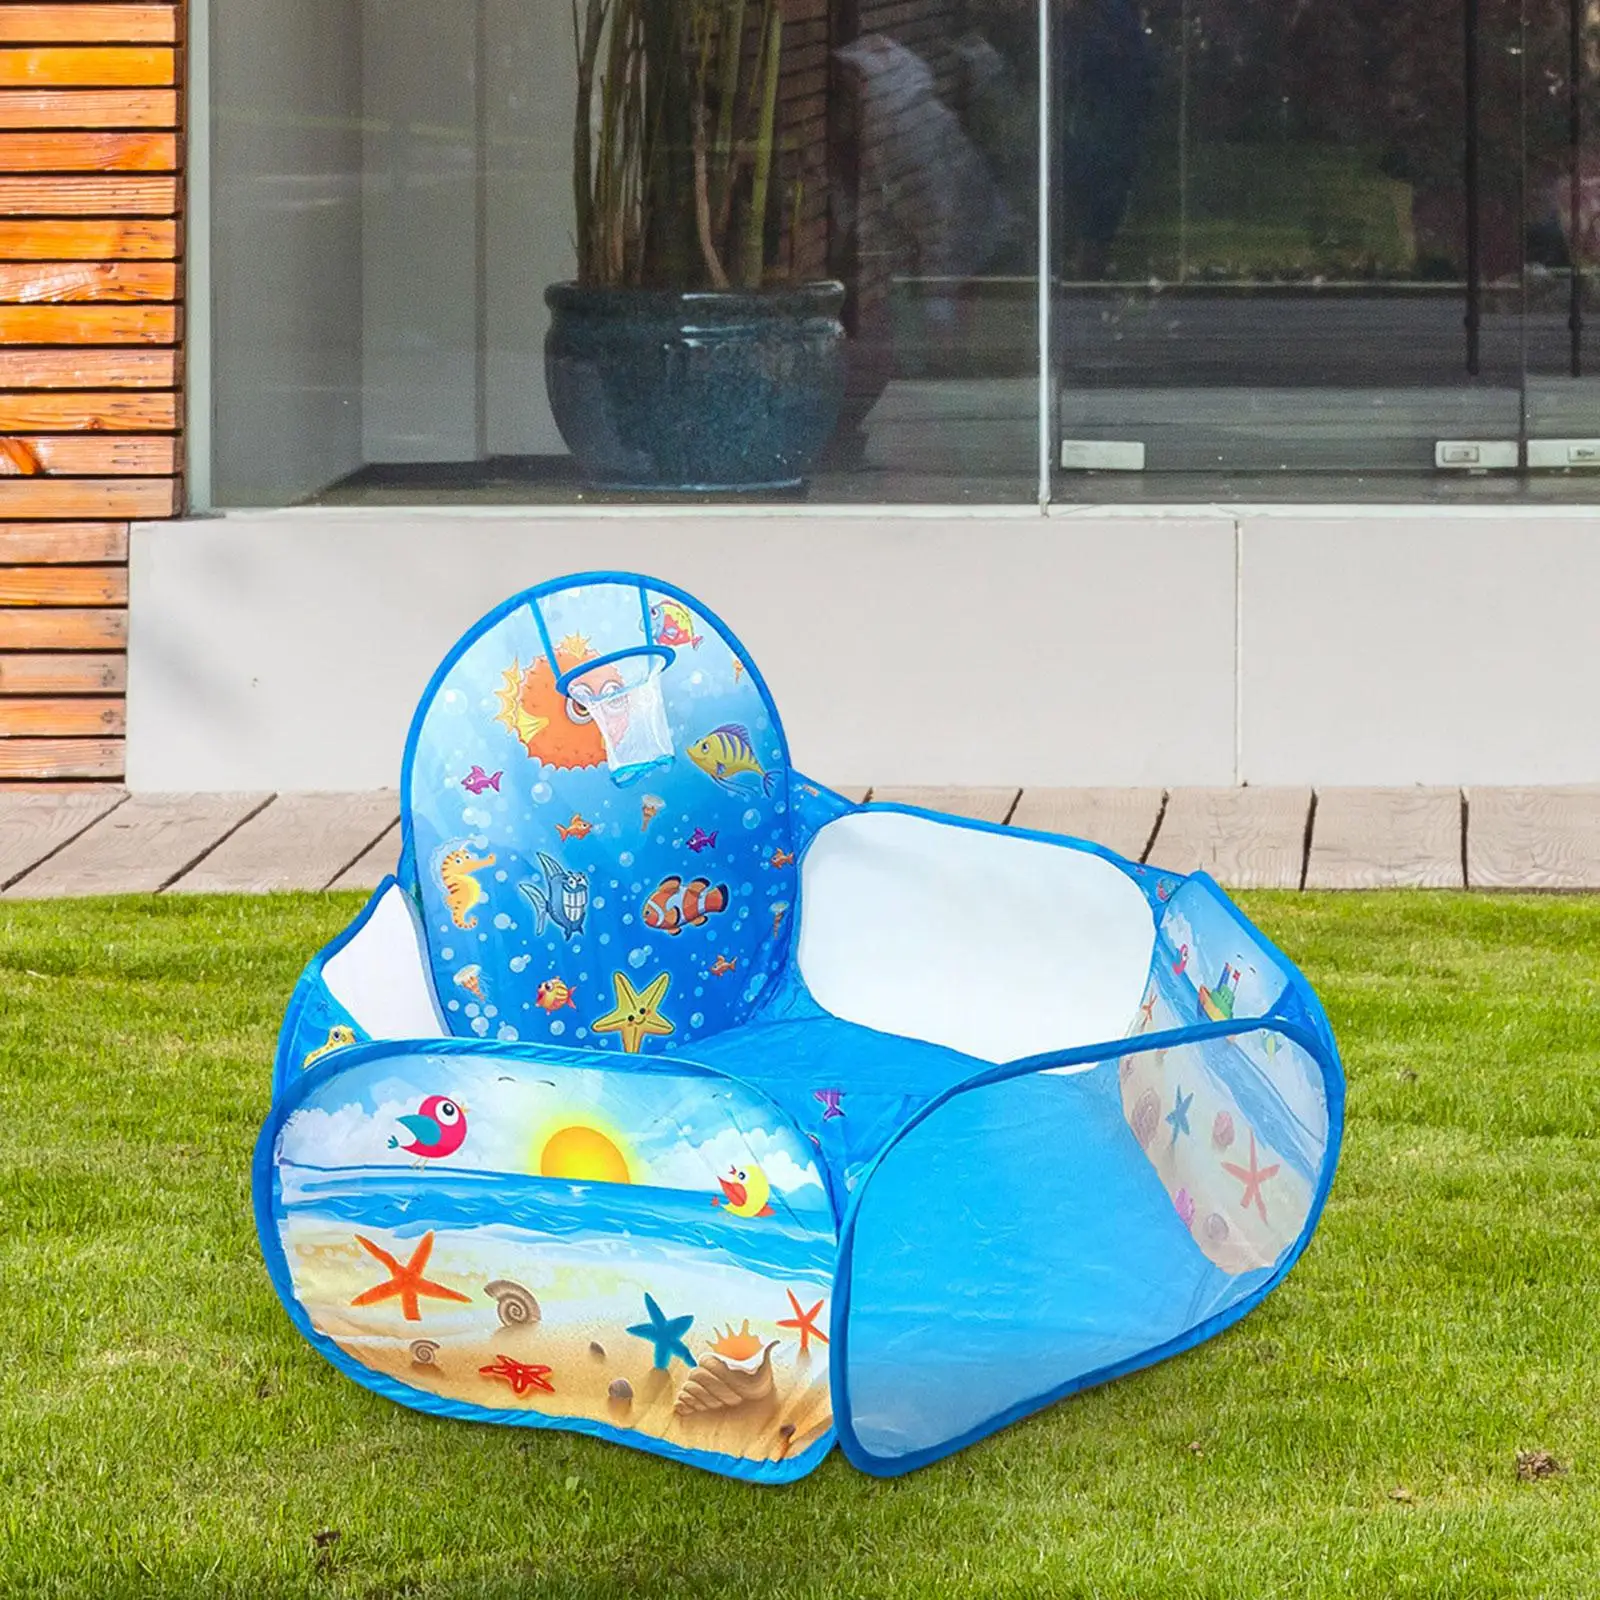 Kids Play Tent Child Room Decoration Gift Playpen Ball Pool Foldable Tent Playhouse for Boy Girls Toddlers Kids Children